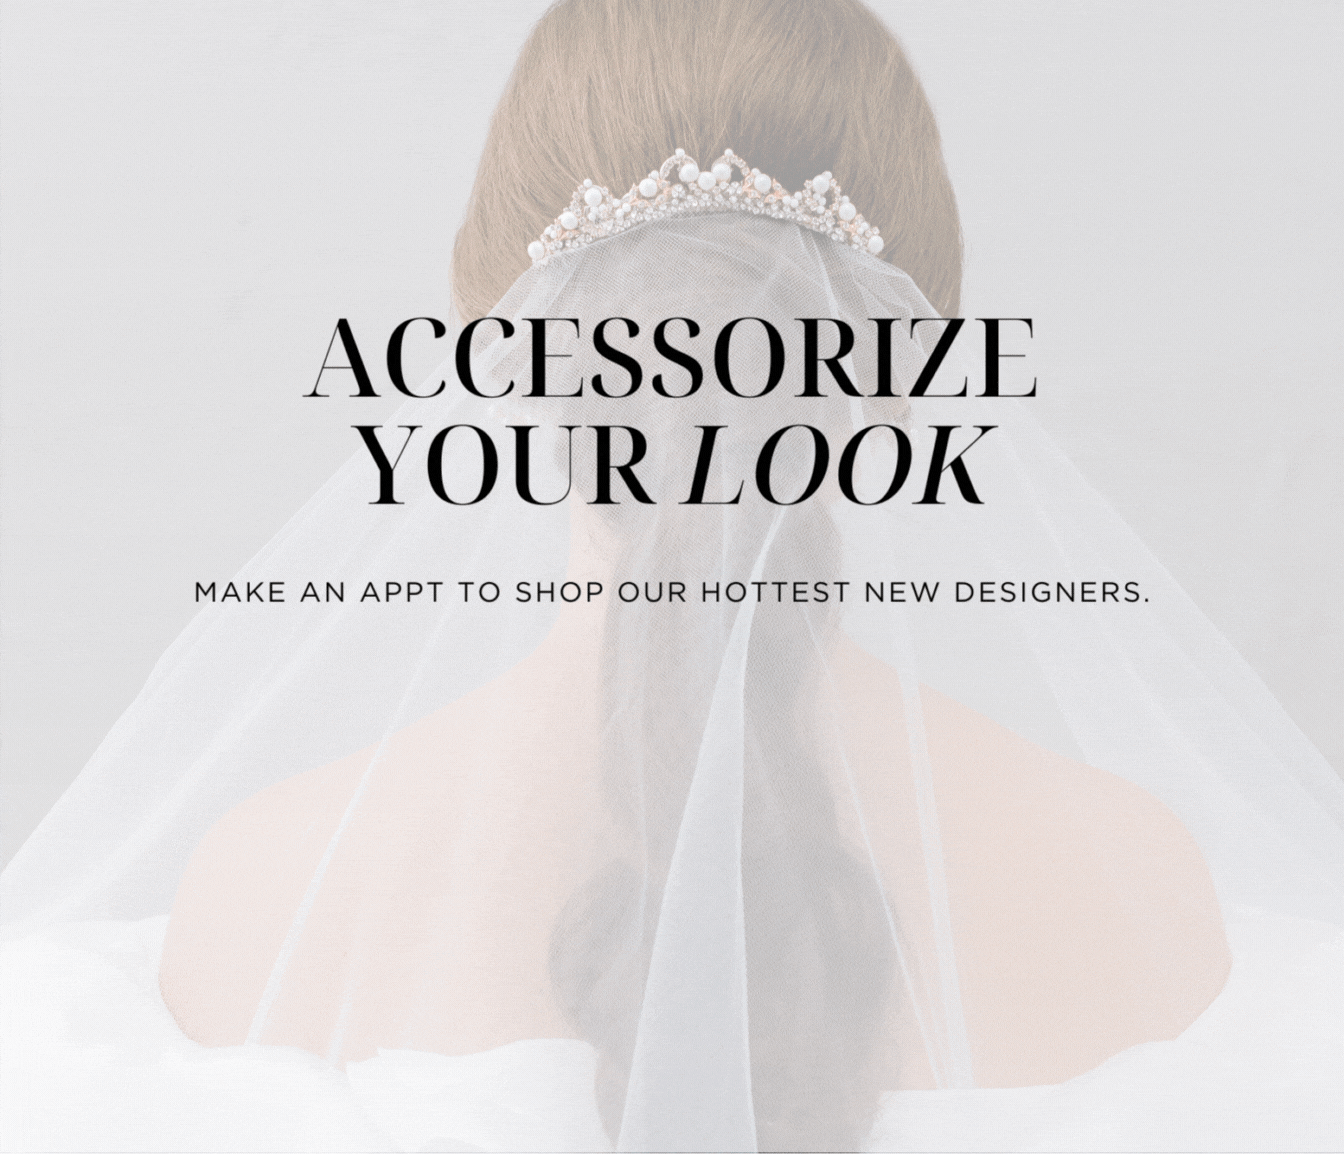 Accessorize your look